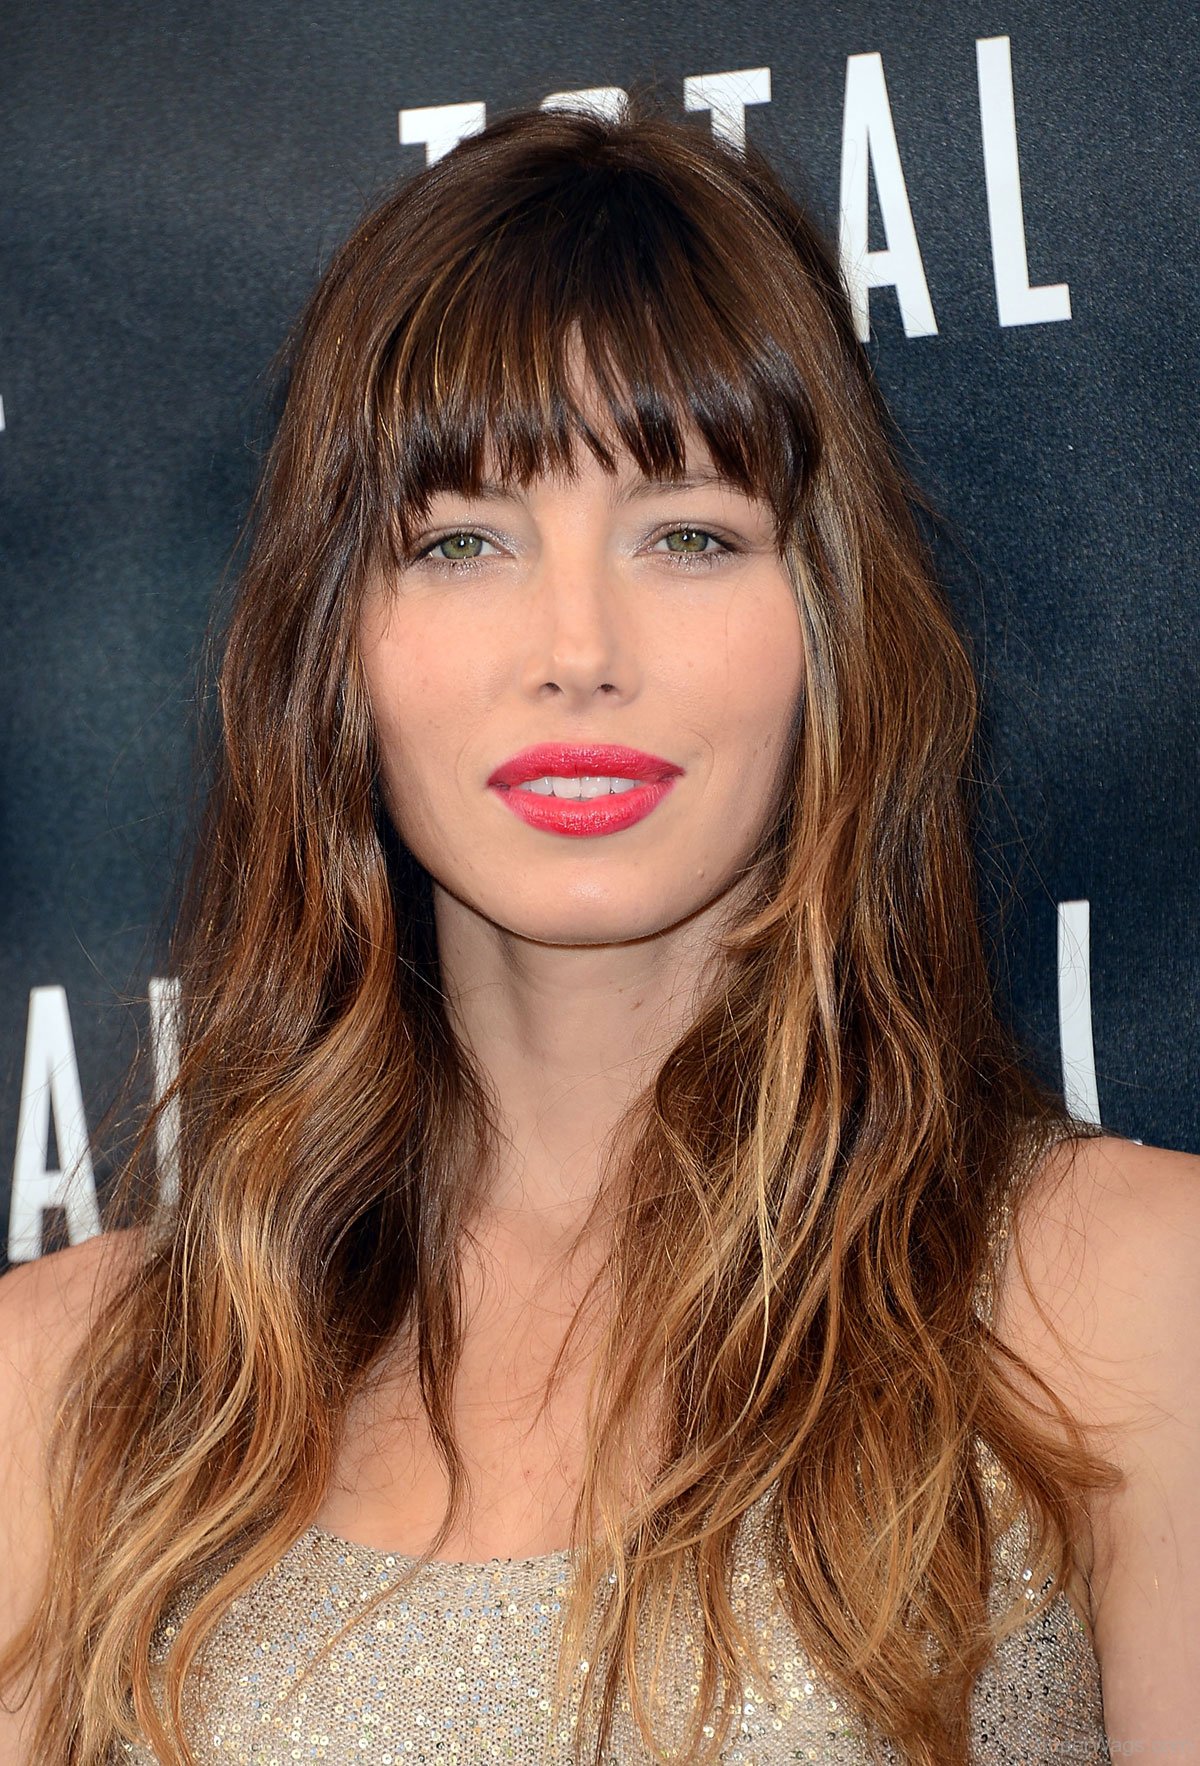 Jessica Biel Red Lips | Super WAGS - Hottest Wives and Girlfriends of ...